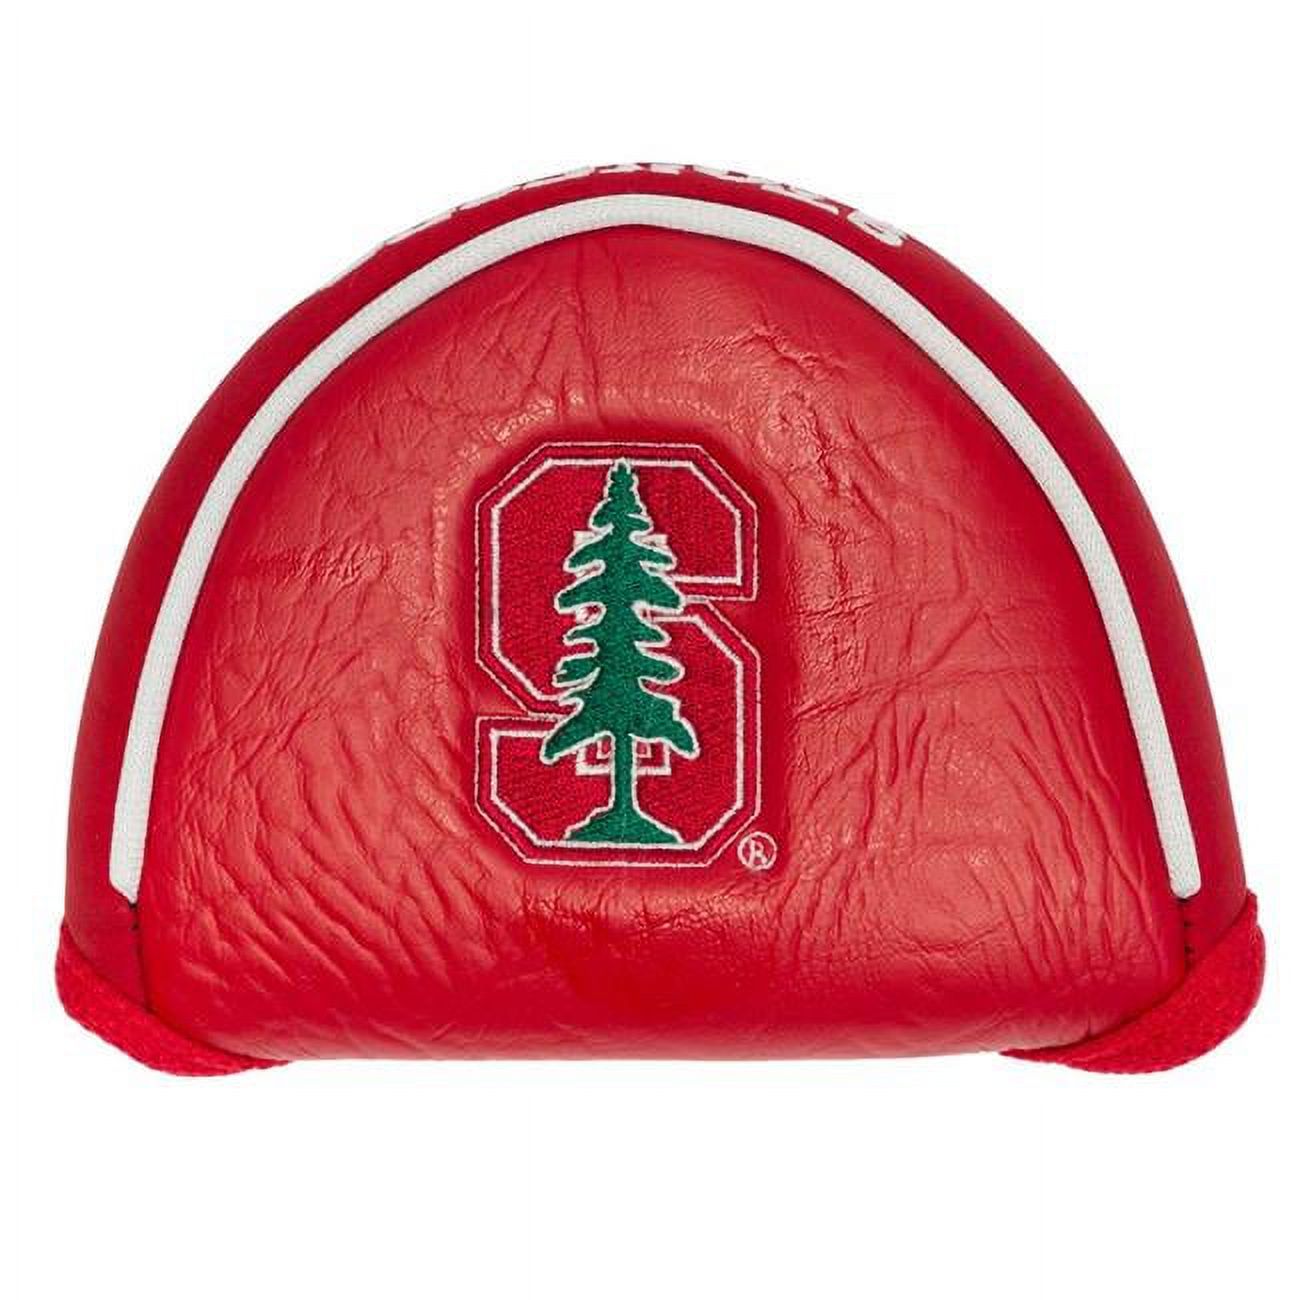 Teamgolf 42031 Stanford University Cardinal Golf Mallet Putter Cover&#44; Red - image 1 of 2